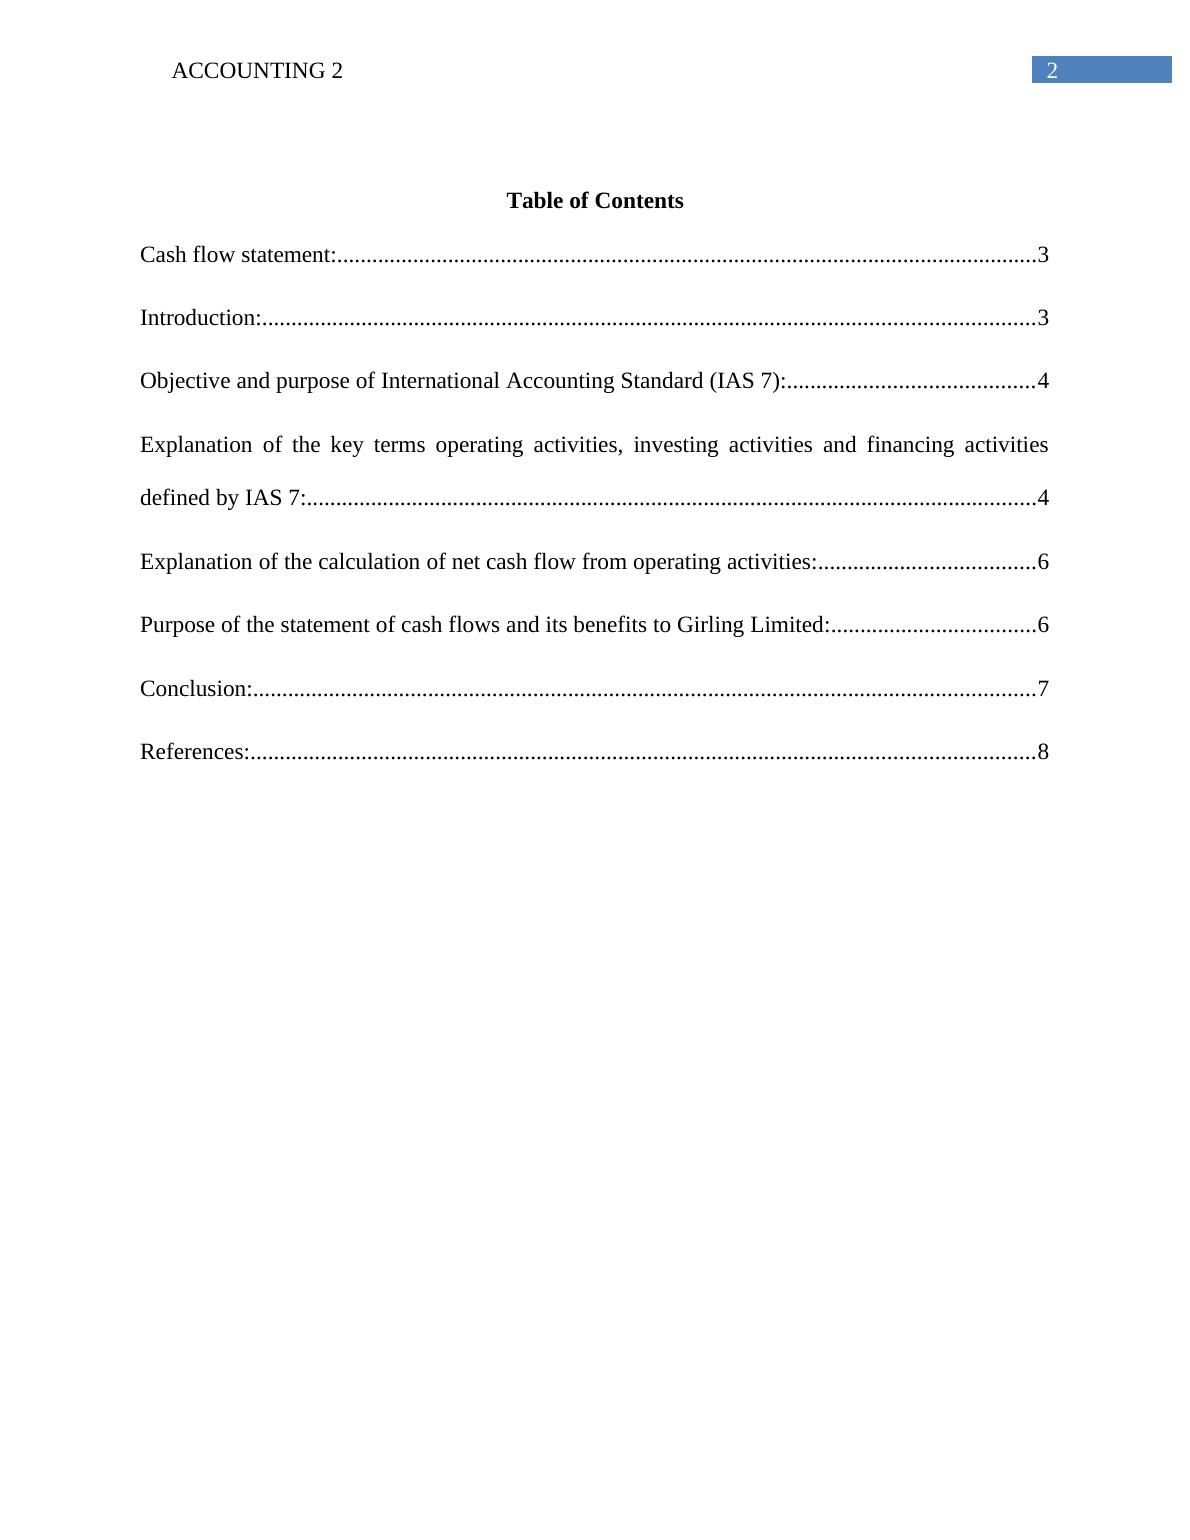 Accounting Sample Assignment_3